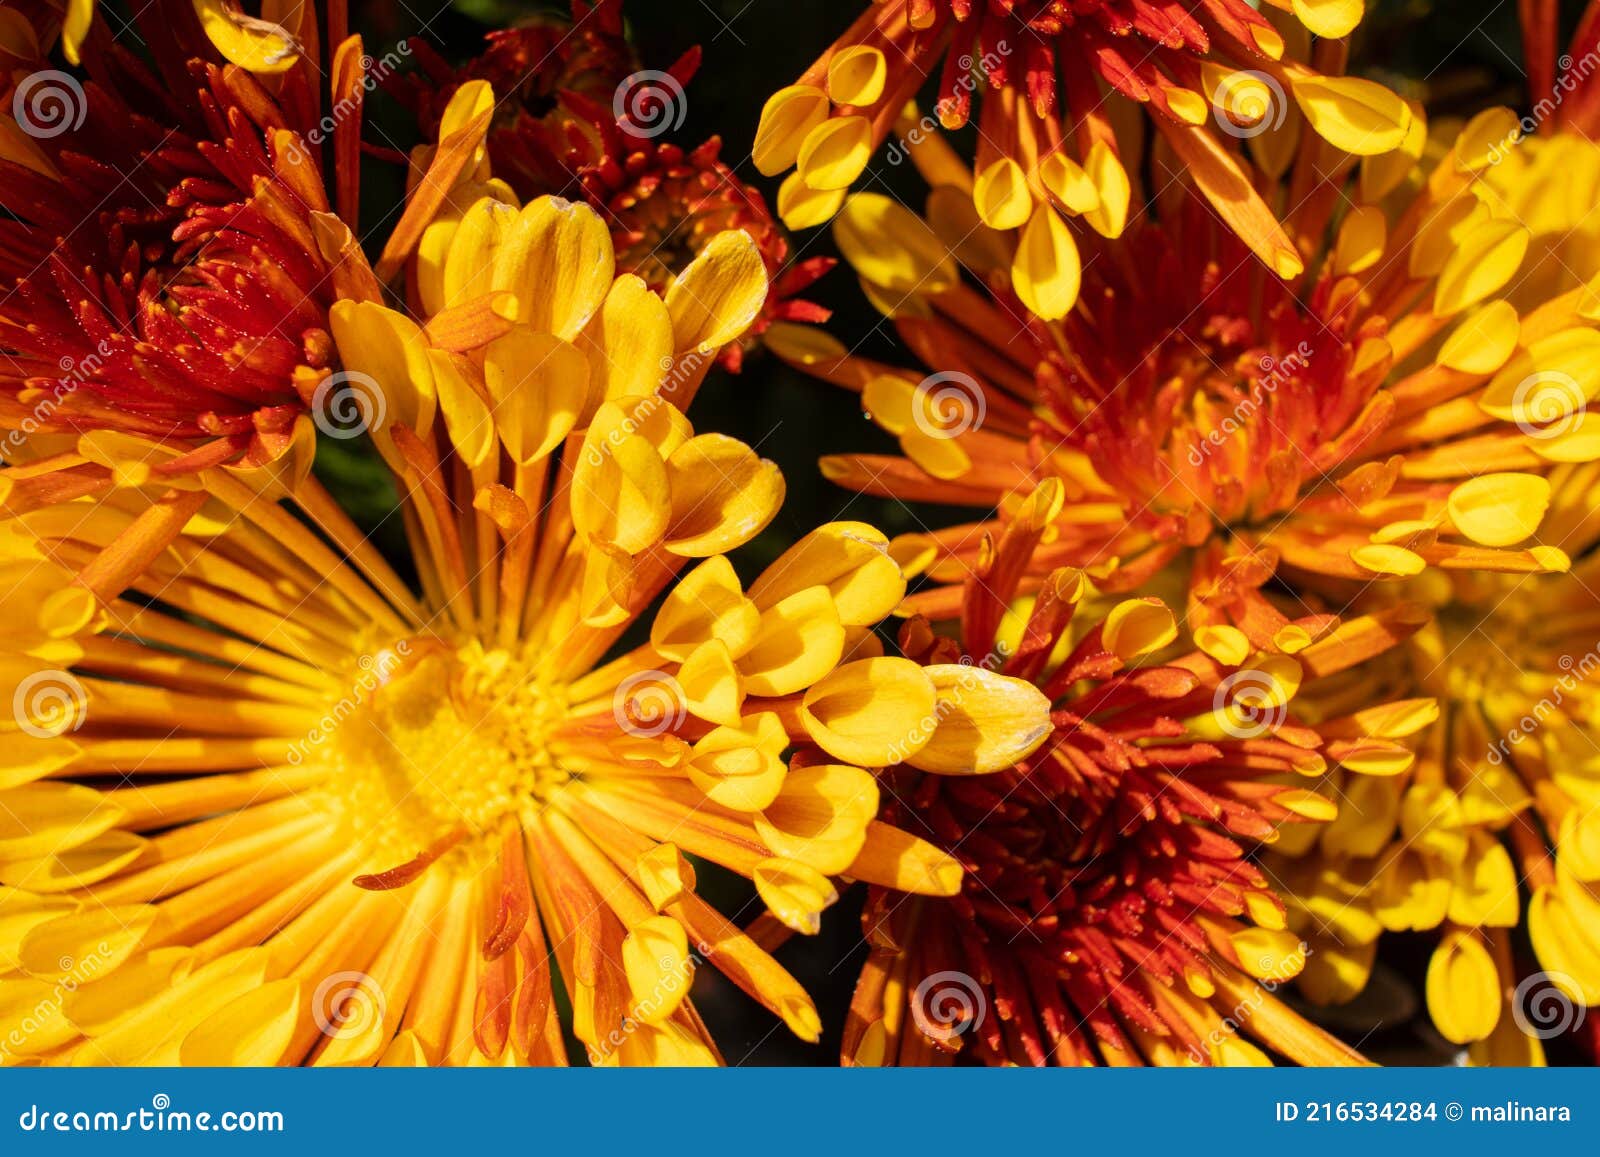 Bright Yellow, Orange and Red Flowers Filling the Frame. Floral Background,  Cheerful Happy Feeling. Stock Photo - Image of card, beautiful: 216534284